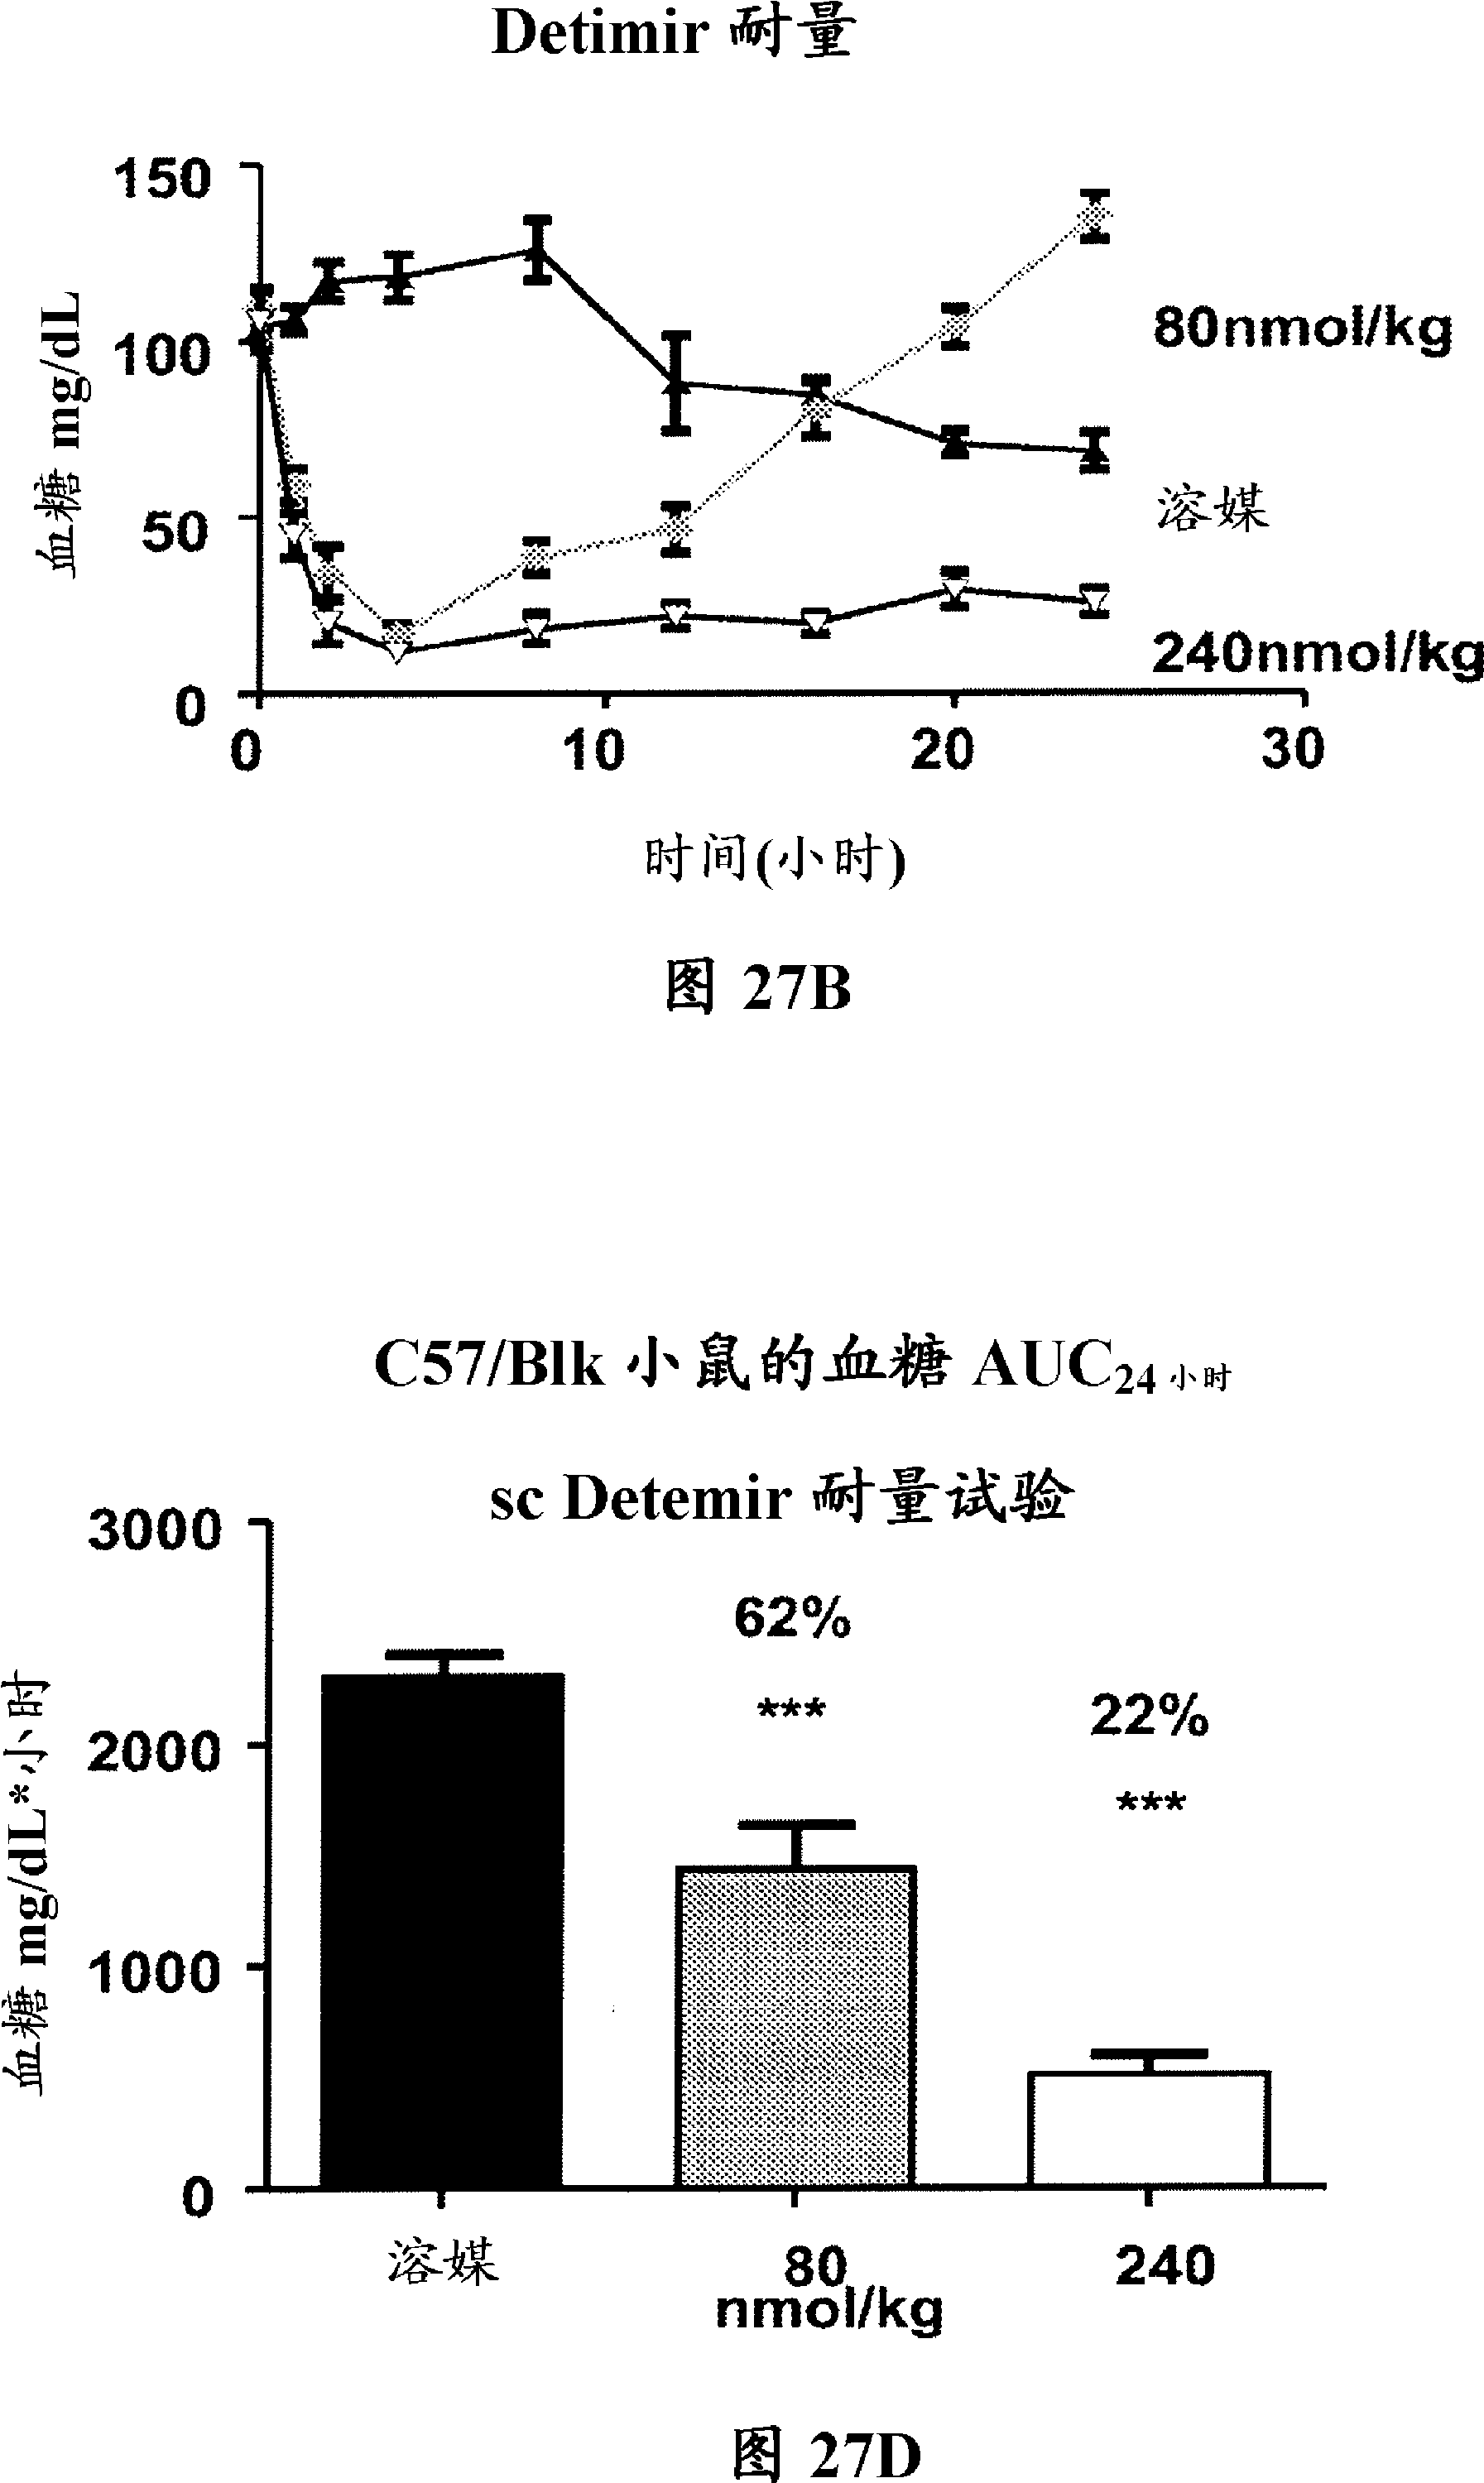 CTP-based insulin analogs for treatment of diabetes